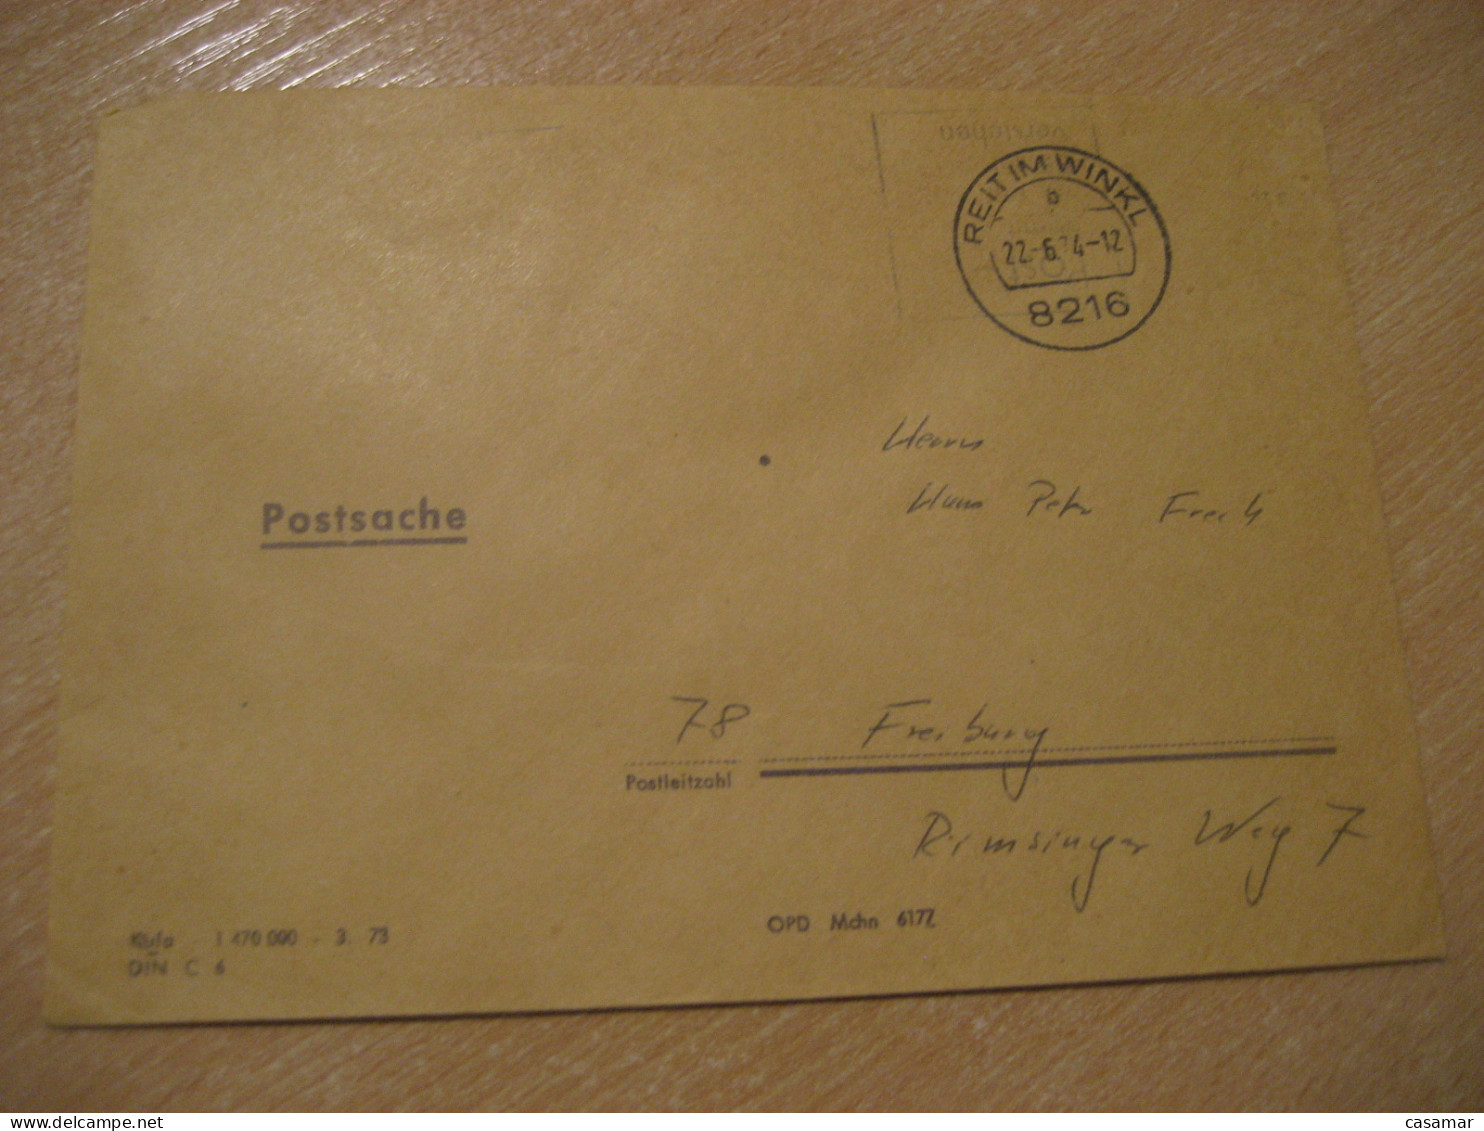 REIT IM WINKL 1974 To Freiburg Postage Paid Cancel Cover GERMANY - Lettres & Documents